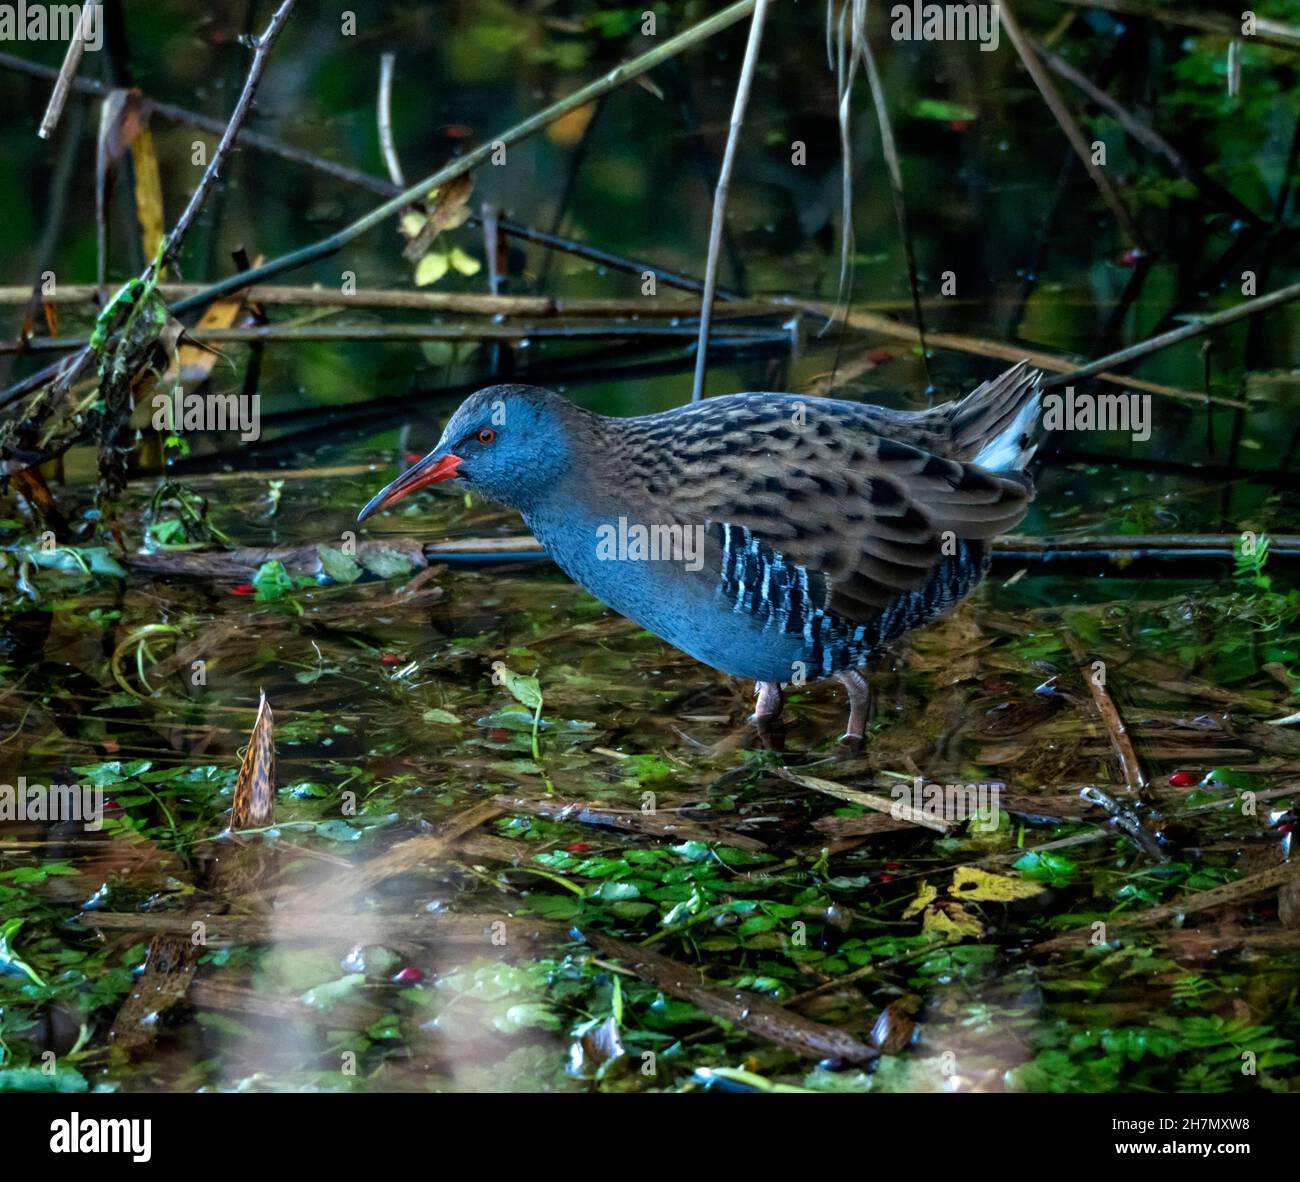 Water rail (Rallus aquaticus), which breeds in wetlands, pictured in the Adur river valley near Steyning, Bramber and Upper Beeding, West Sussex, UK Stock Photo